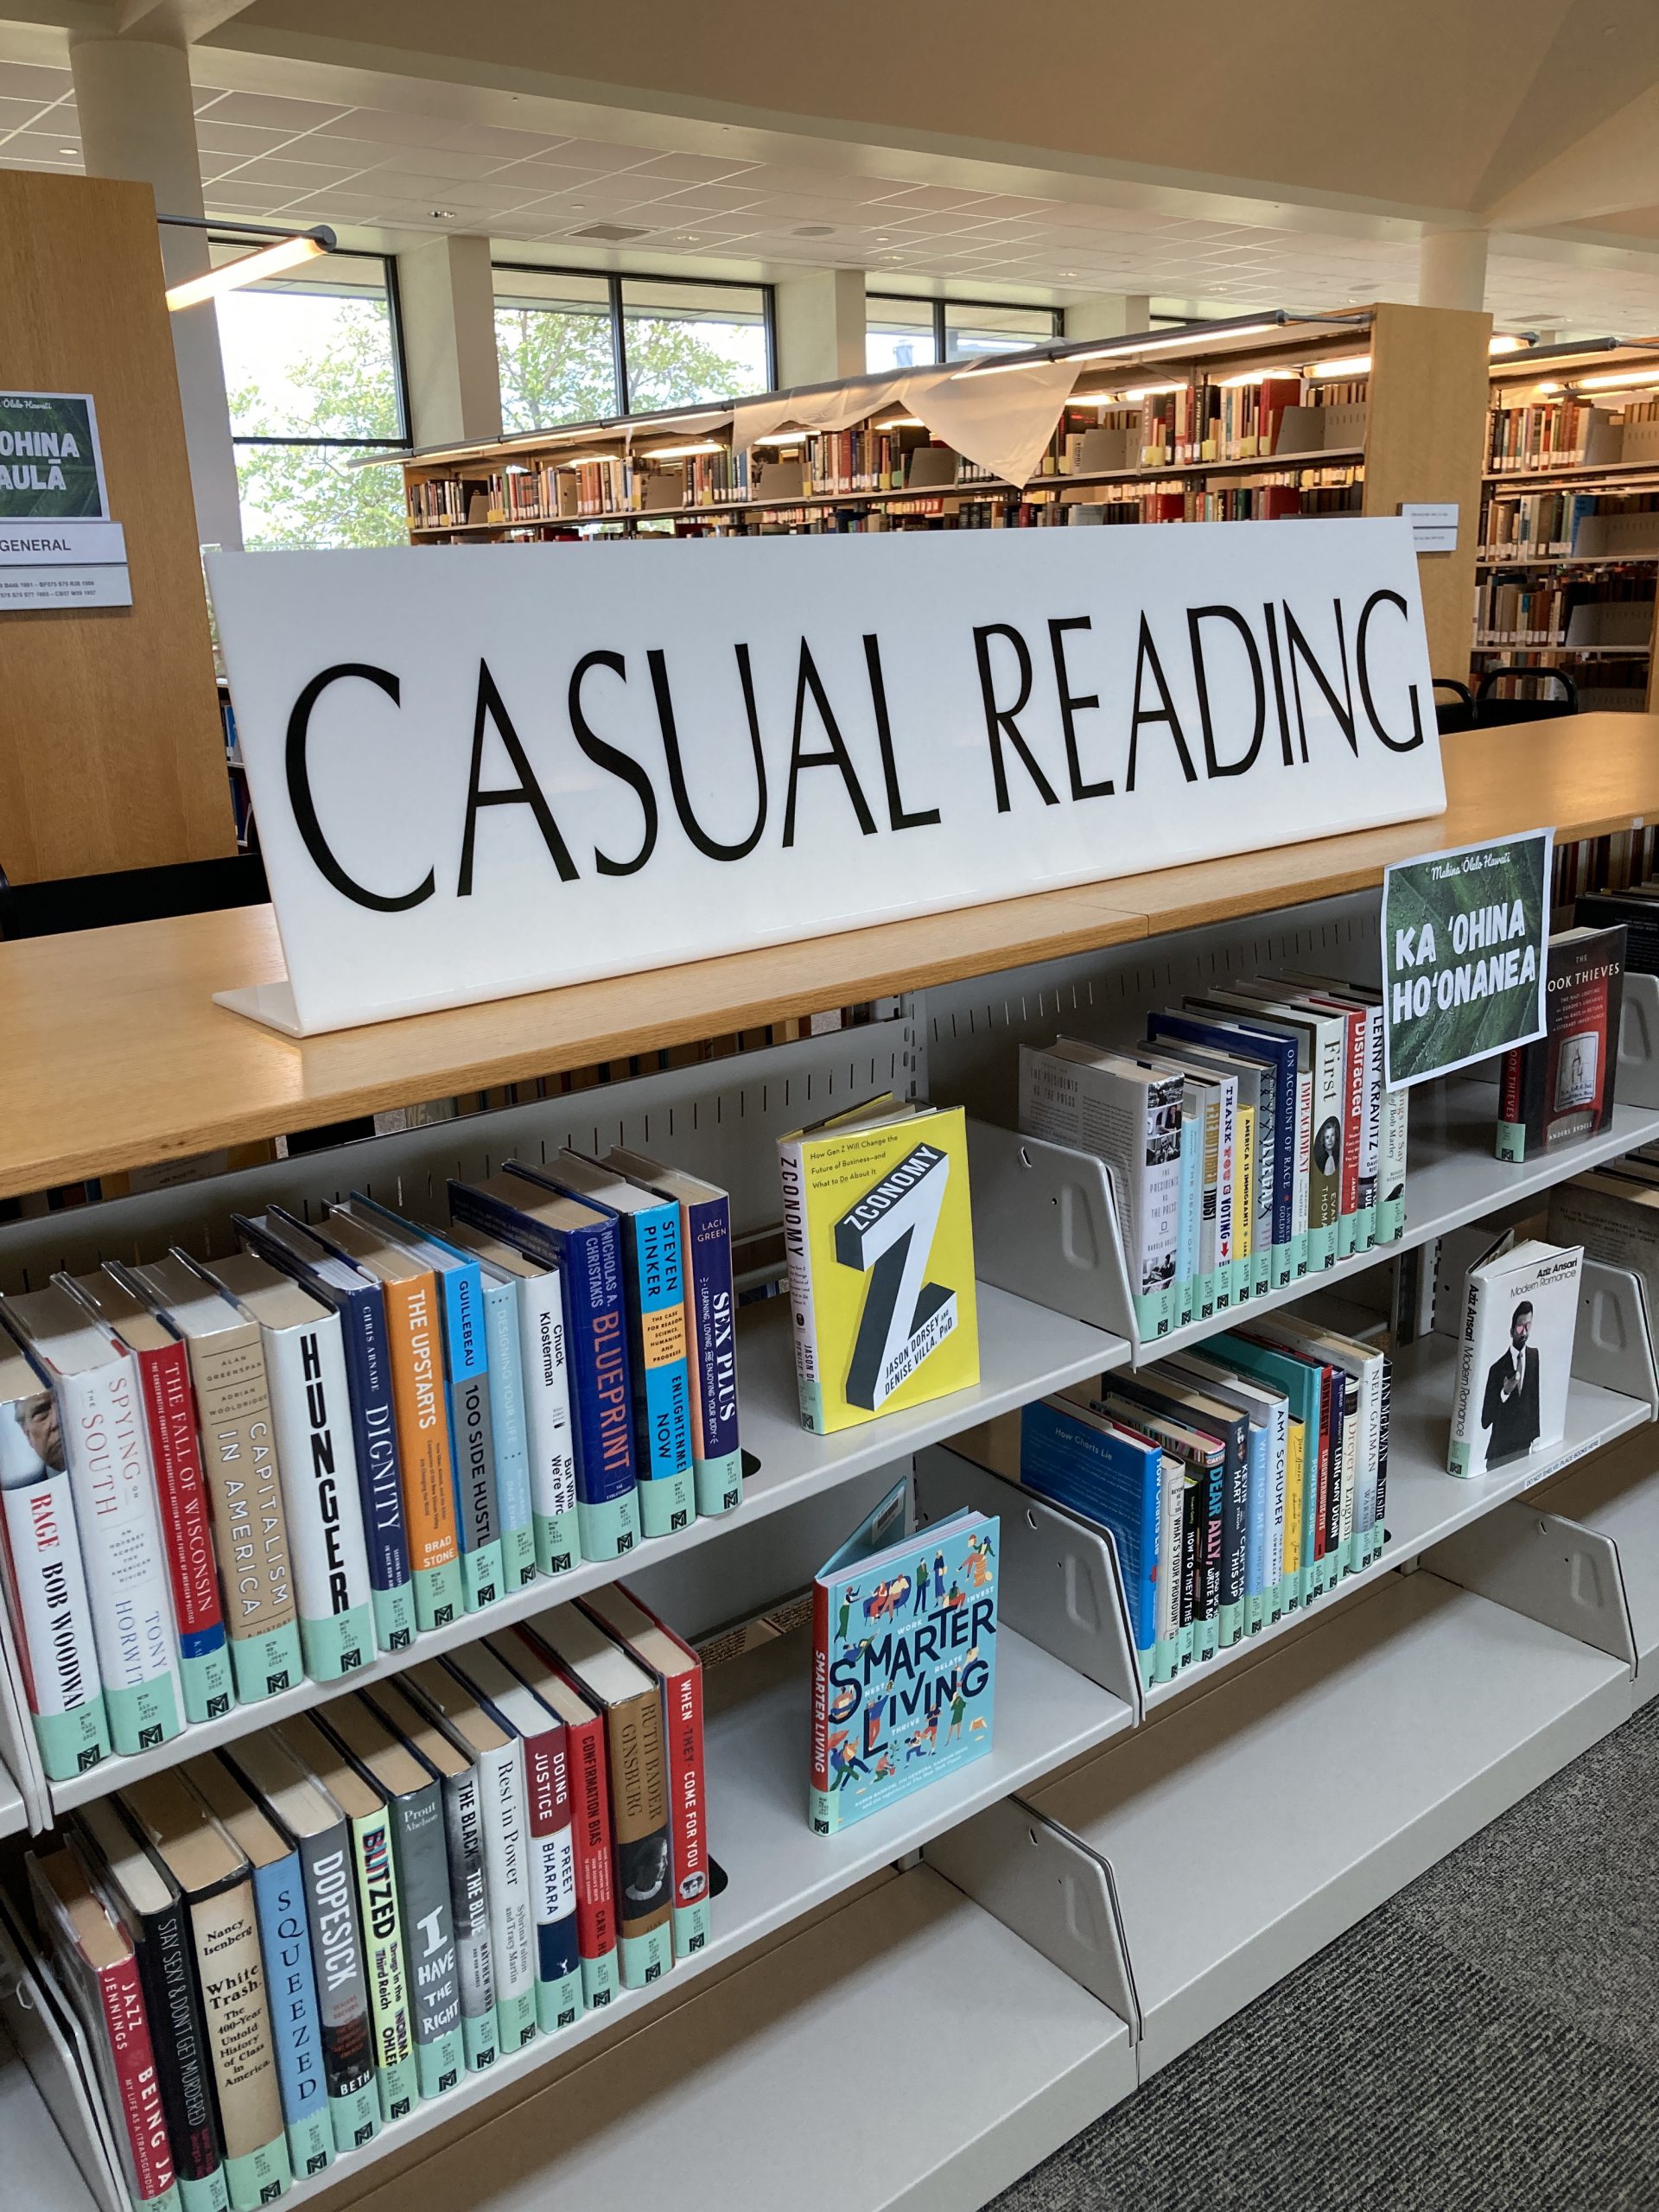 A picture of the Library's Casual Reading collection of books